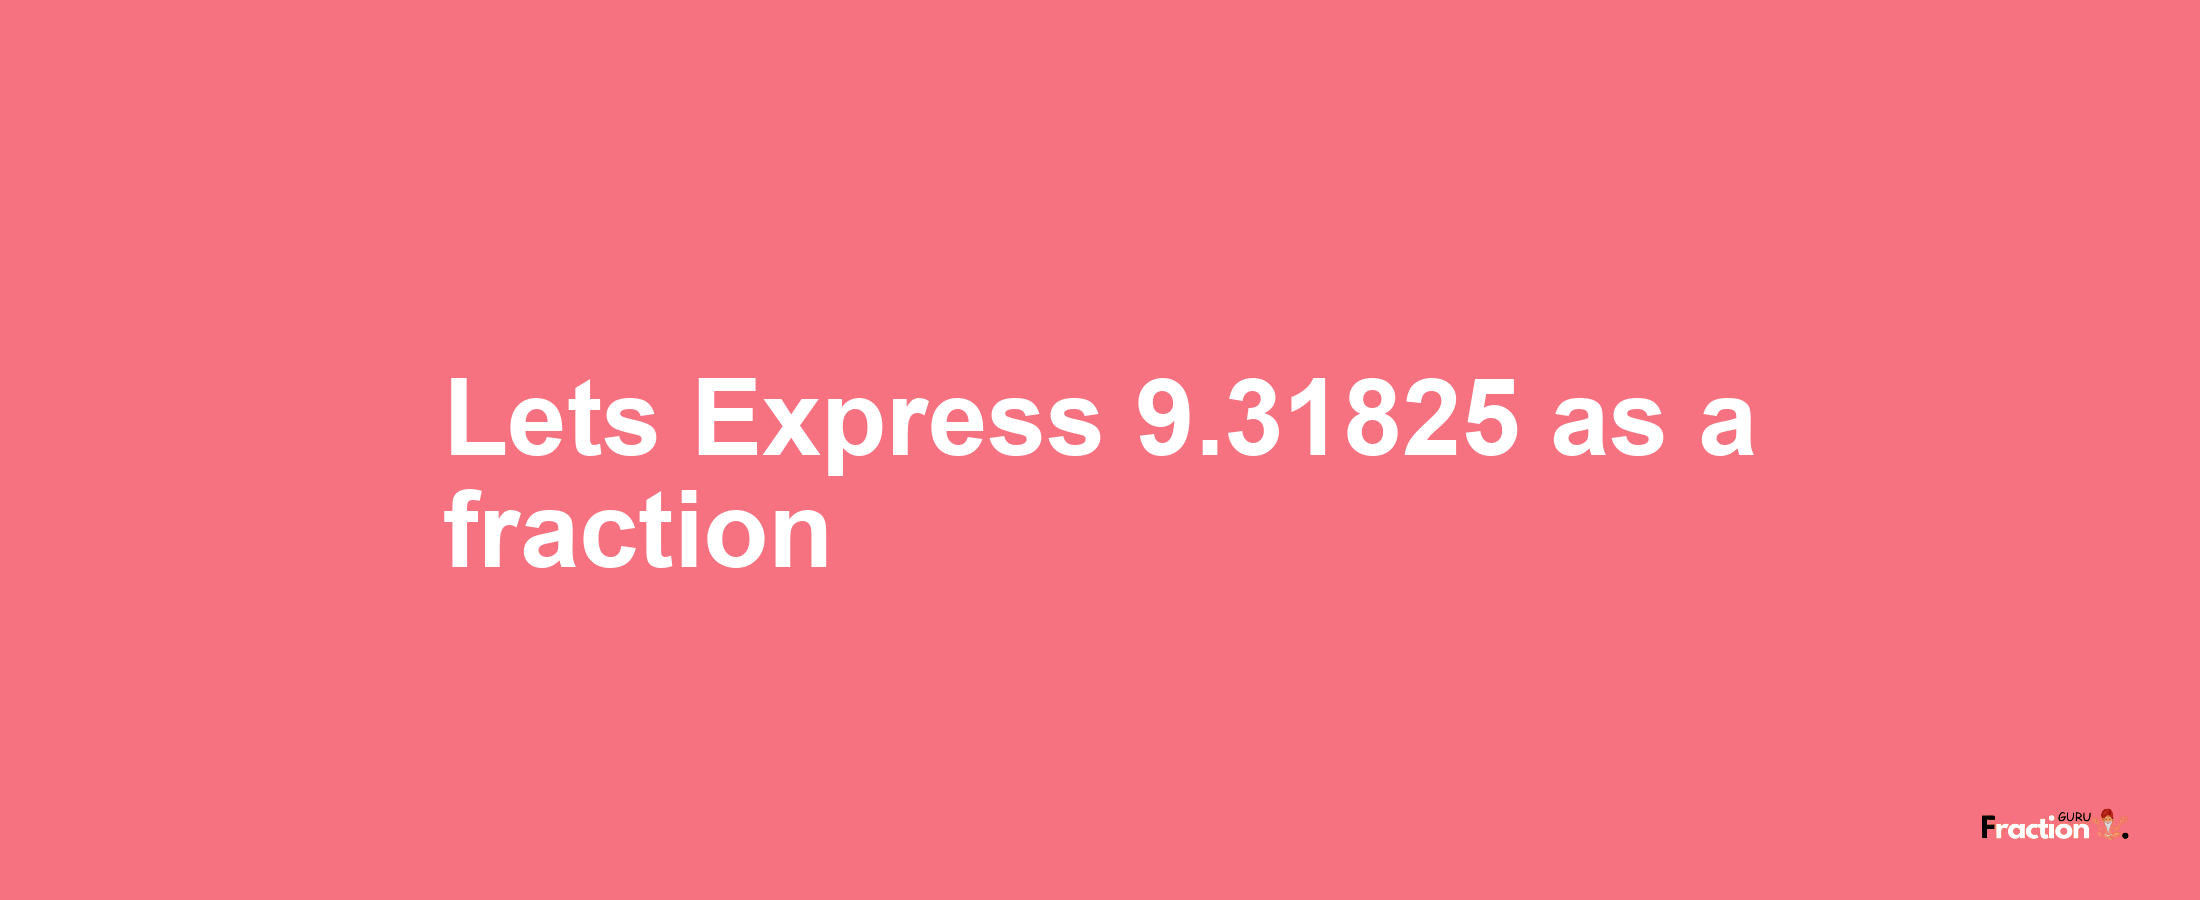 Lets Express 9.31825 as afraction